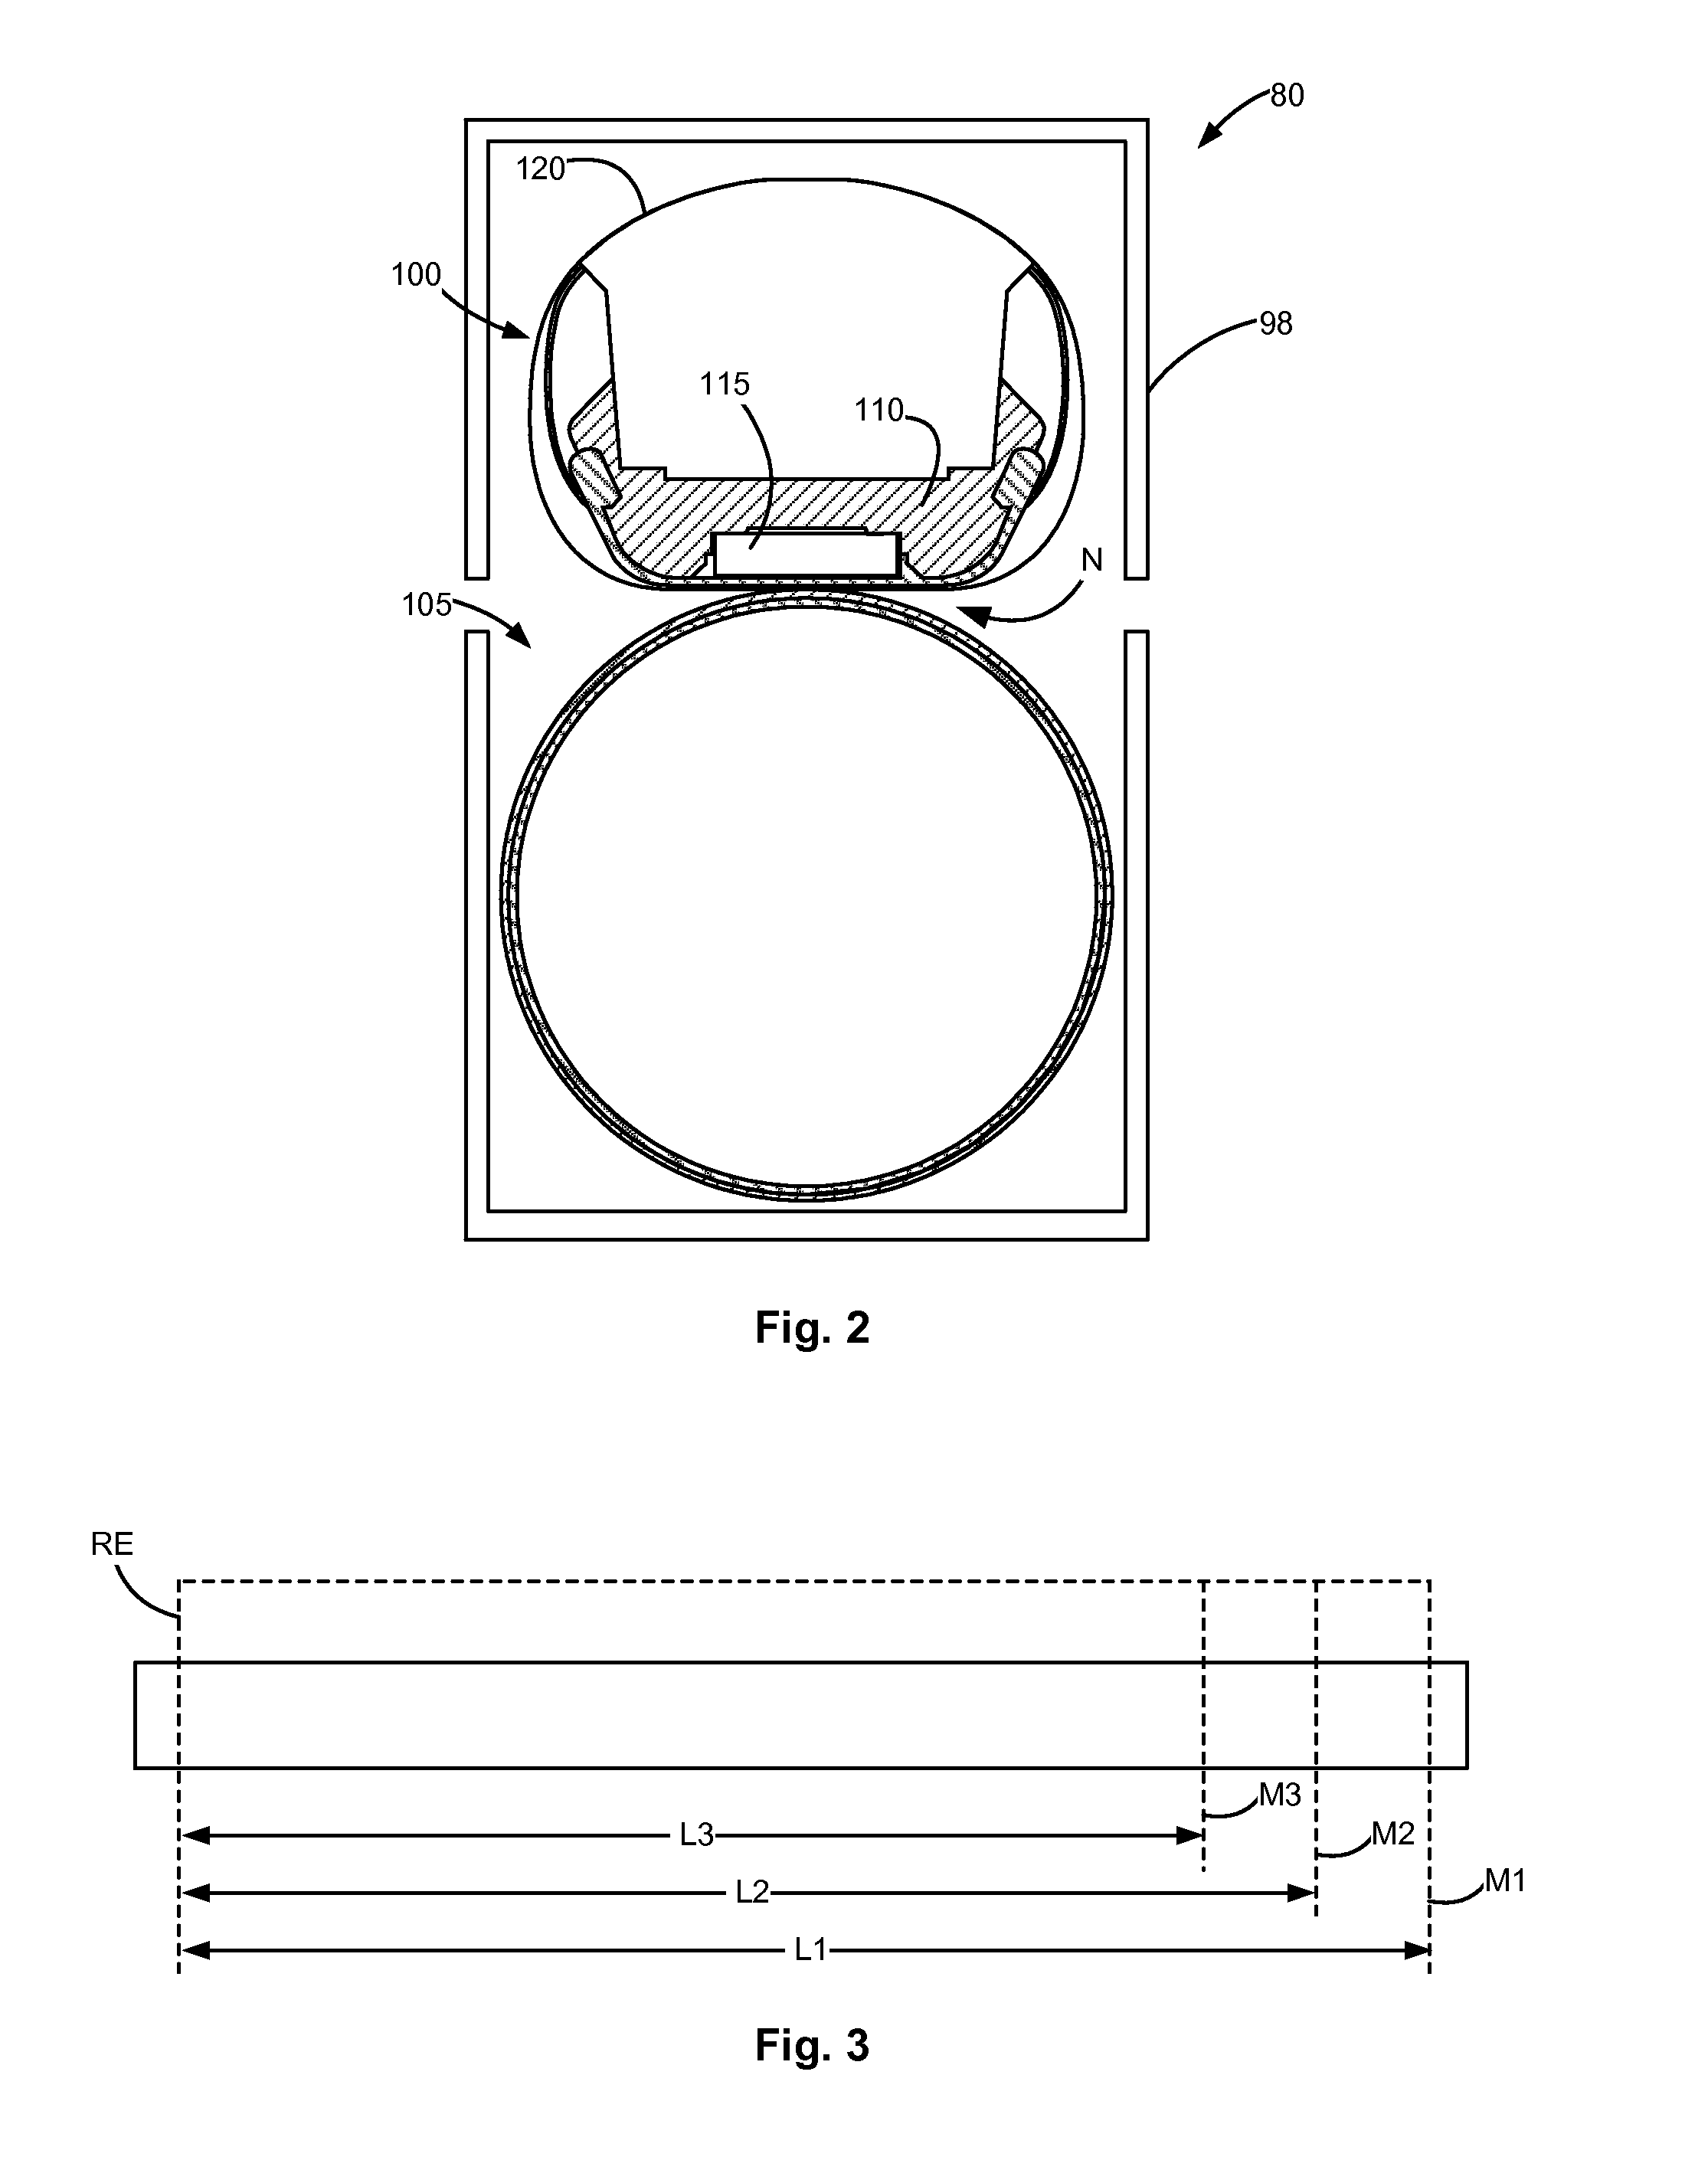 Fuser Assembly with Automatic Media Width Sensing and Thermal Compensation